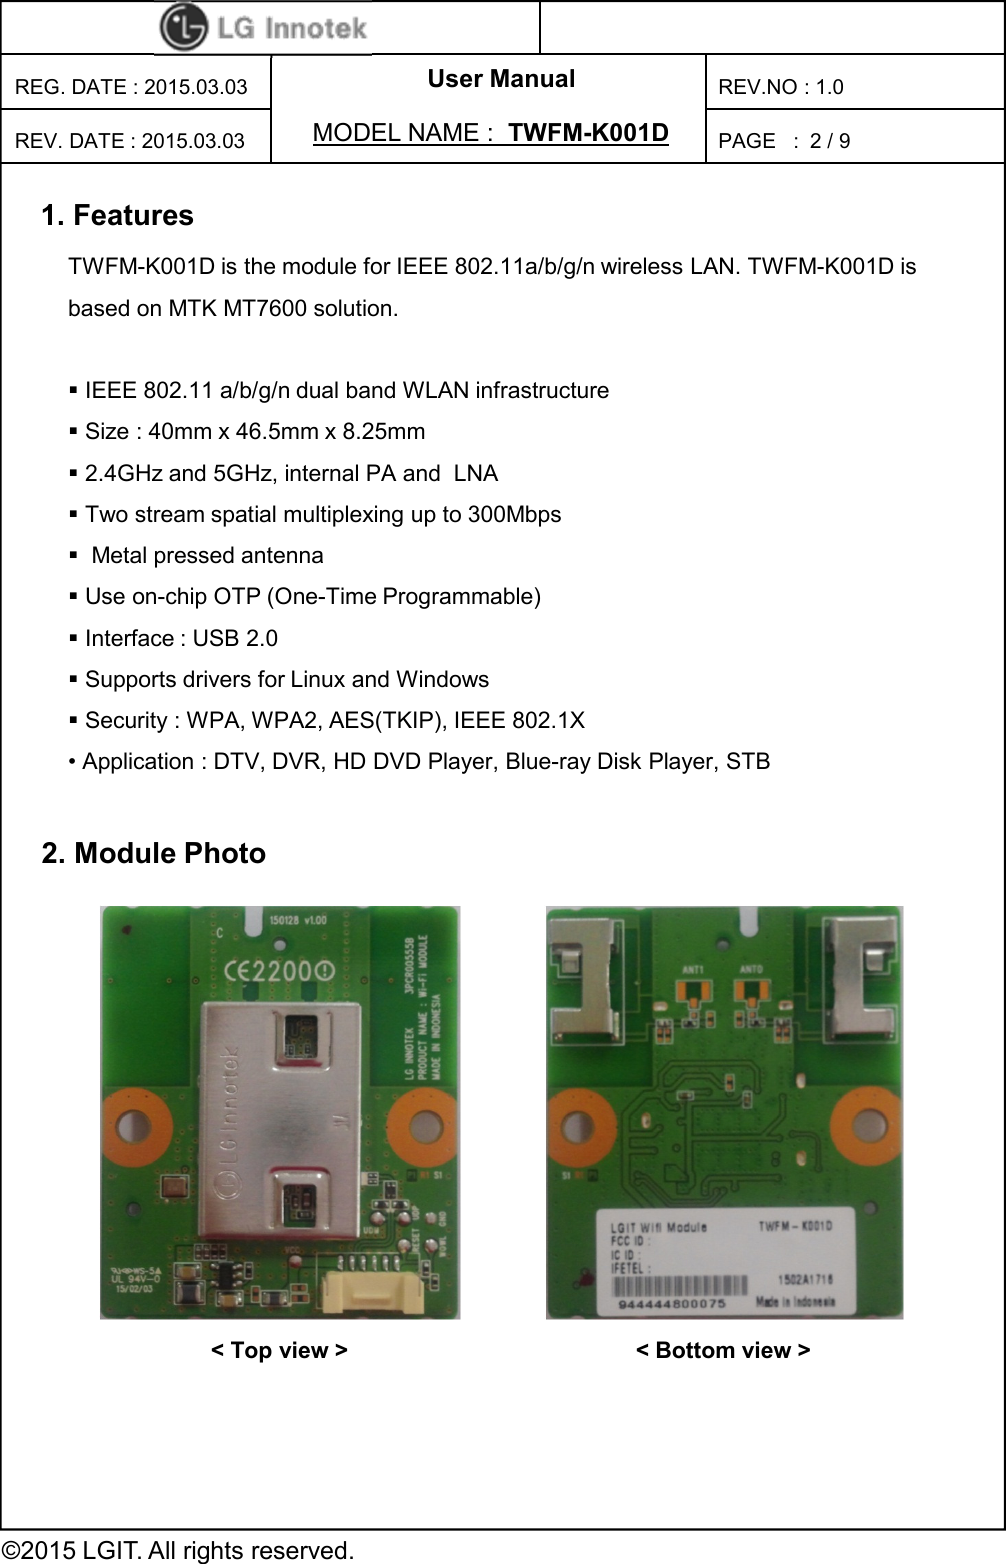 User Manual PAGE   : REG. DATE : 2015.03.03 MODEL NAME :  TWFM-K001D  REV. DATE : 2015.03.03 REV.NO : 1.0 ©2015 LGIT. All rights reserved. 2 / 9 2. Module Photo 1. Features TWFM-K001D is the module for IEEE 802.11a/b/g/n wireless LAN. TWFM-K001D is based on MTK MT7600 solution.   IEEE 802.11 a/b/g/n dual band WLAN infrastructure  Size : 40mm x 46.5mm x 8.25mm  2.4GHz and 5GHz, internal PA and  LNA  Two stream spatial multiplexing up to 300Mbps   Metal pressed antenna  Use on-chip OTP (One-Time Programmable)  Interface : USB 2.0  Supports drivers for Linux and Windows  Security : WPA, WPA2, AES(TKIP), IEEE 802.1X  • Application : DTV, DVR, HD DVD Player, Blue-ray Disk Player, STB &lt; Top view &gt;  &lt; Bottom view &gt; 